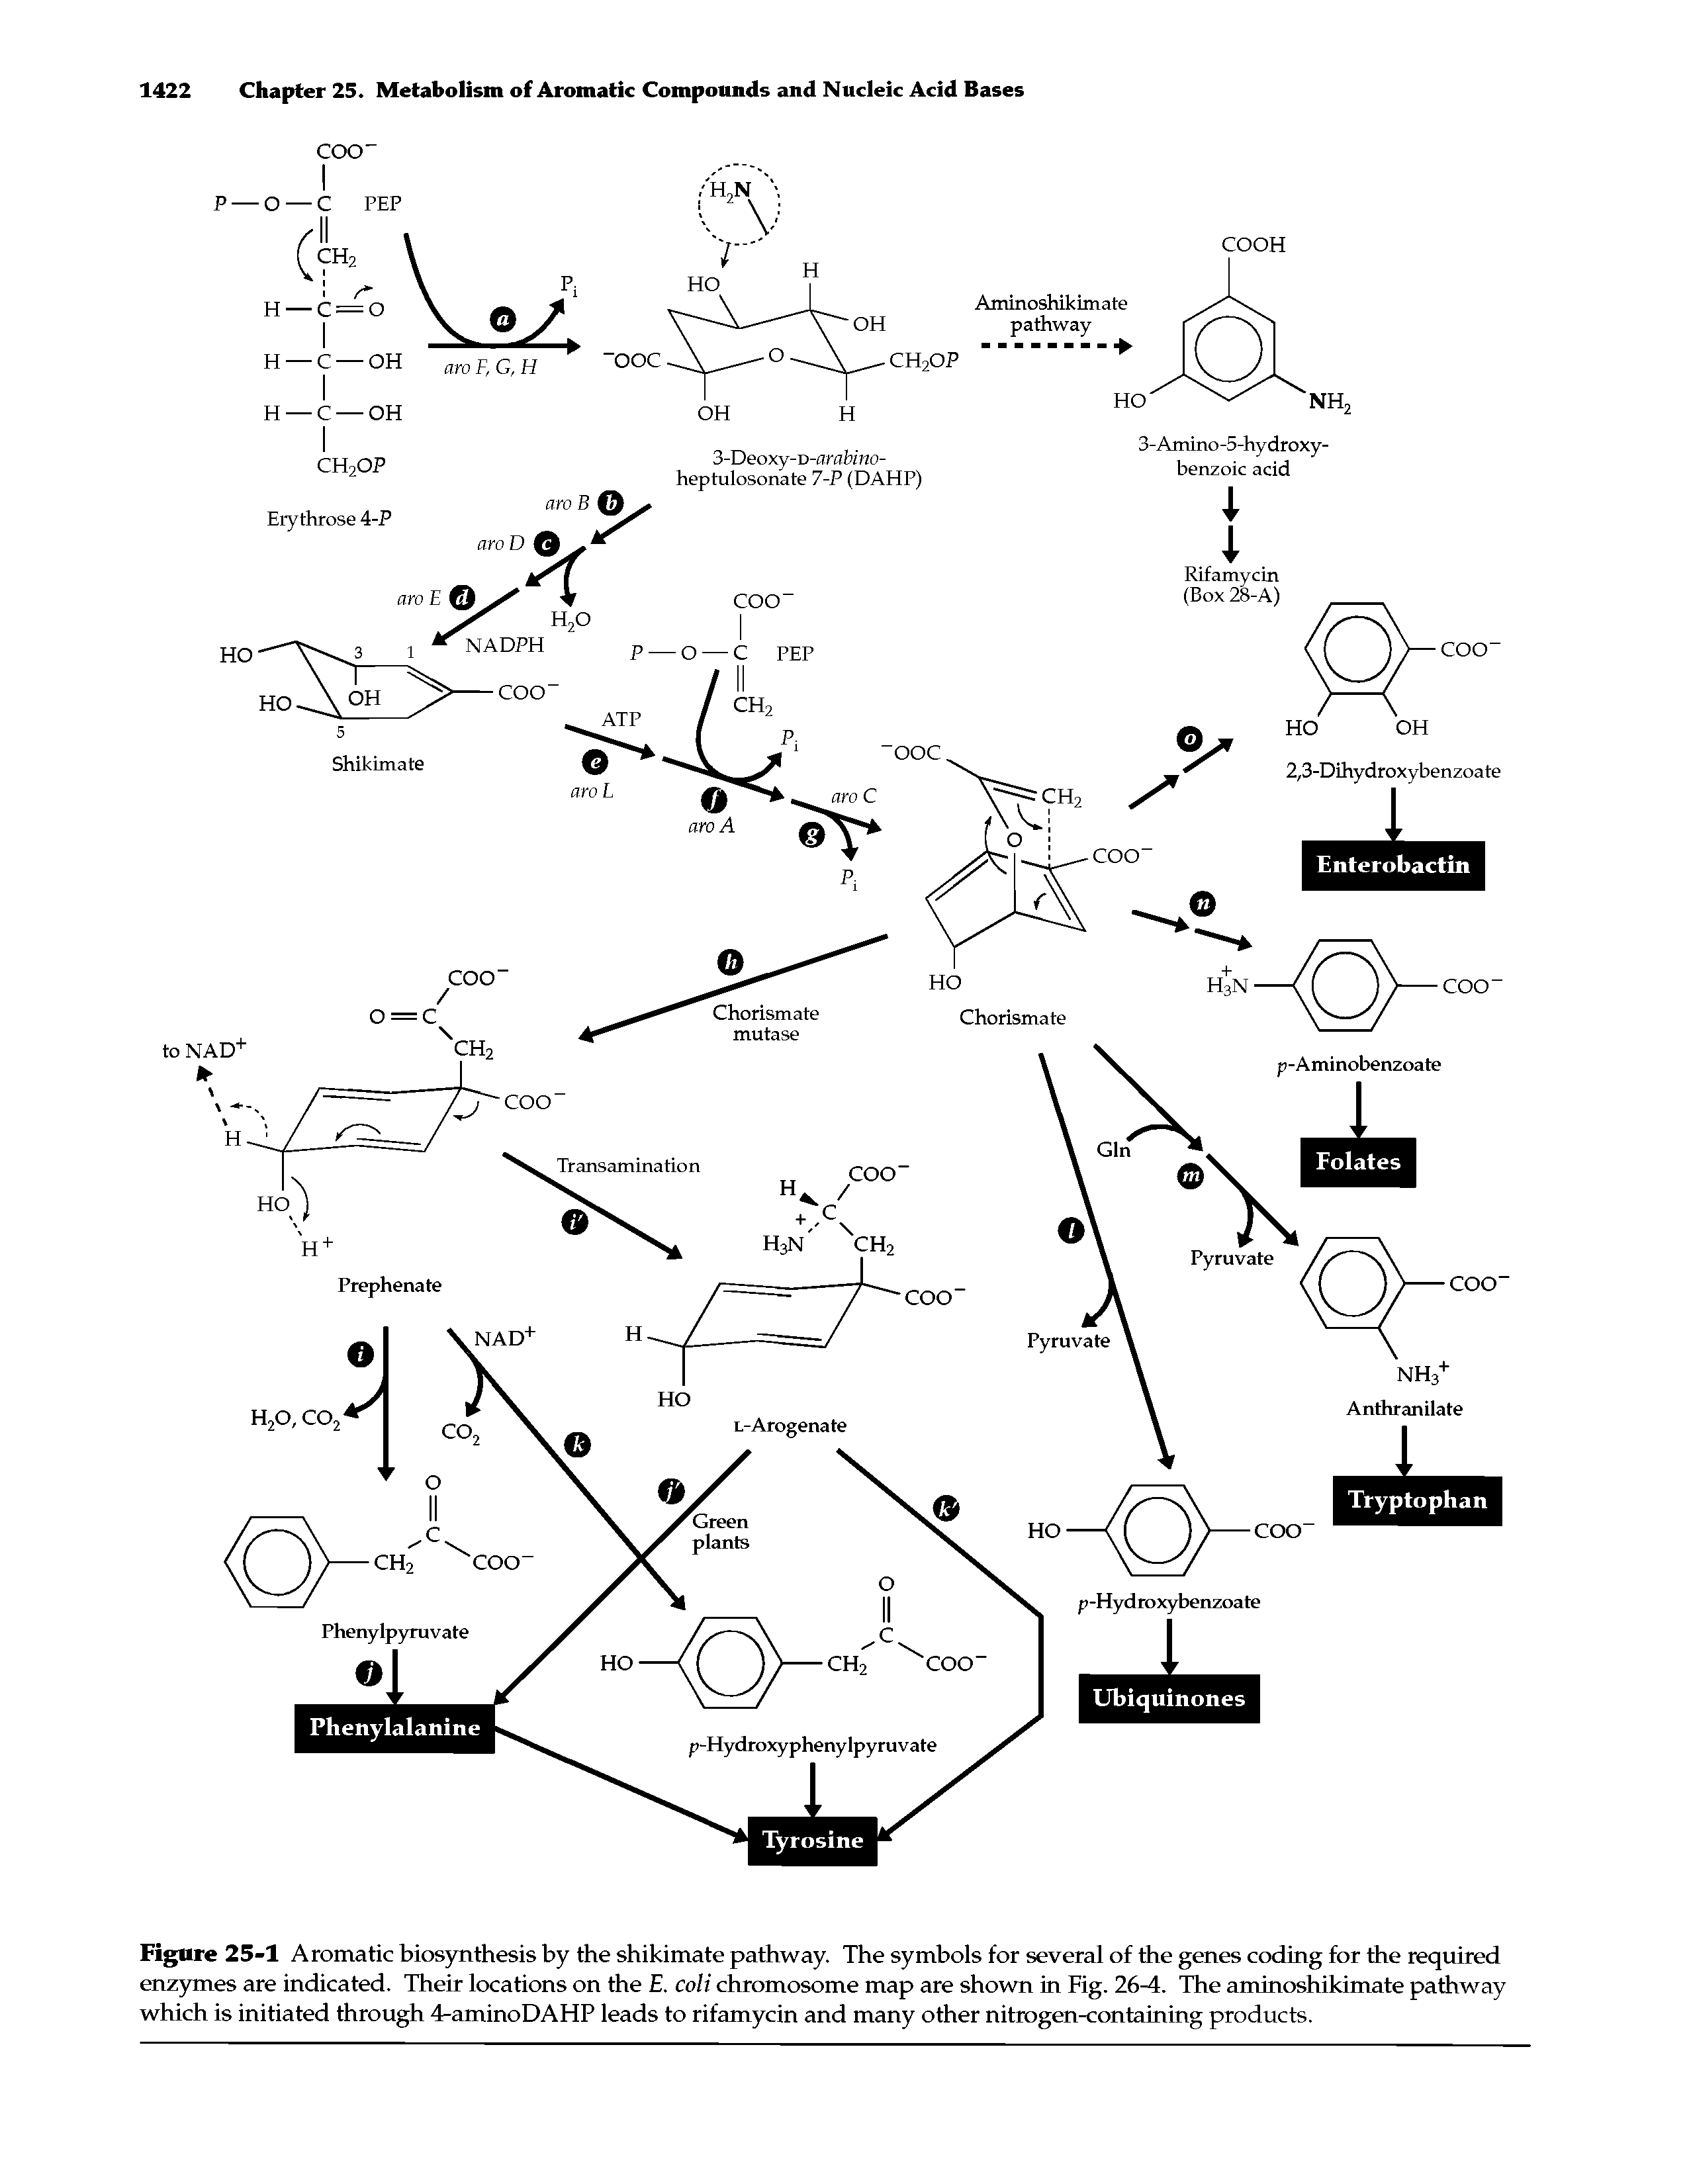 Figure 25-1 Aromatic biosynthesis by the shikimate pathway. The symbols for several of the genes coding for the required enzymes are indicated. Their locations on the E. coli chromosome map are shown in Fig. 26-4. The aminoshikimate pathway which is initiated through 4-aminoDAHP leads to rifamycin and many other nitrogen-containing products.